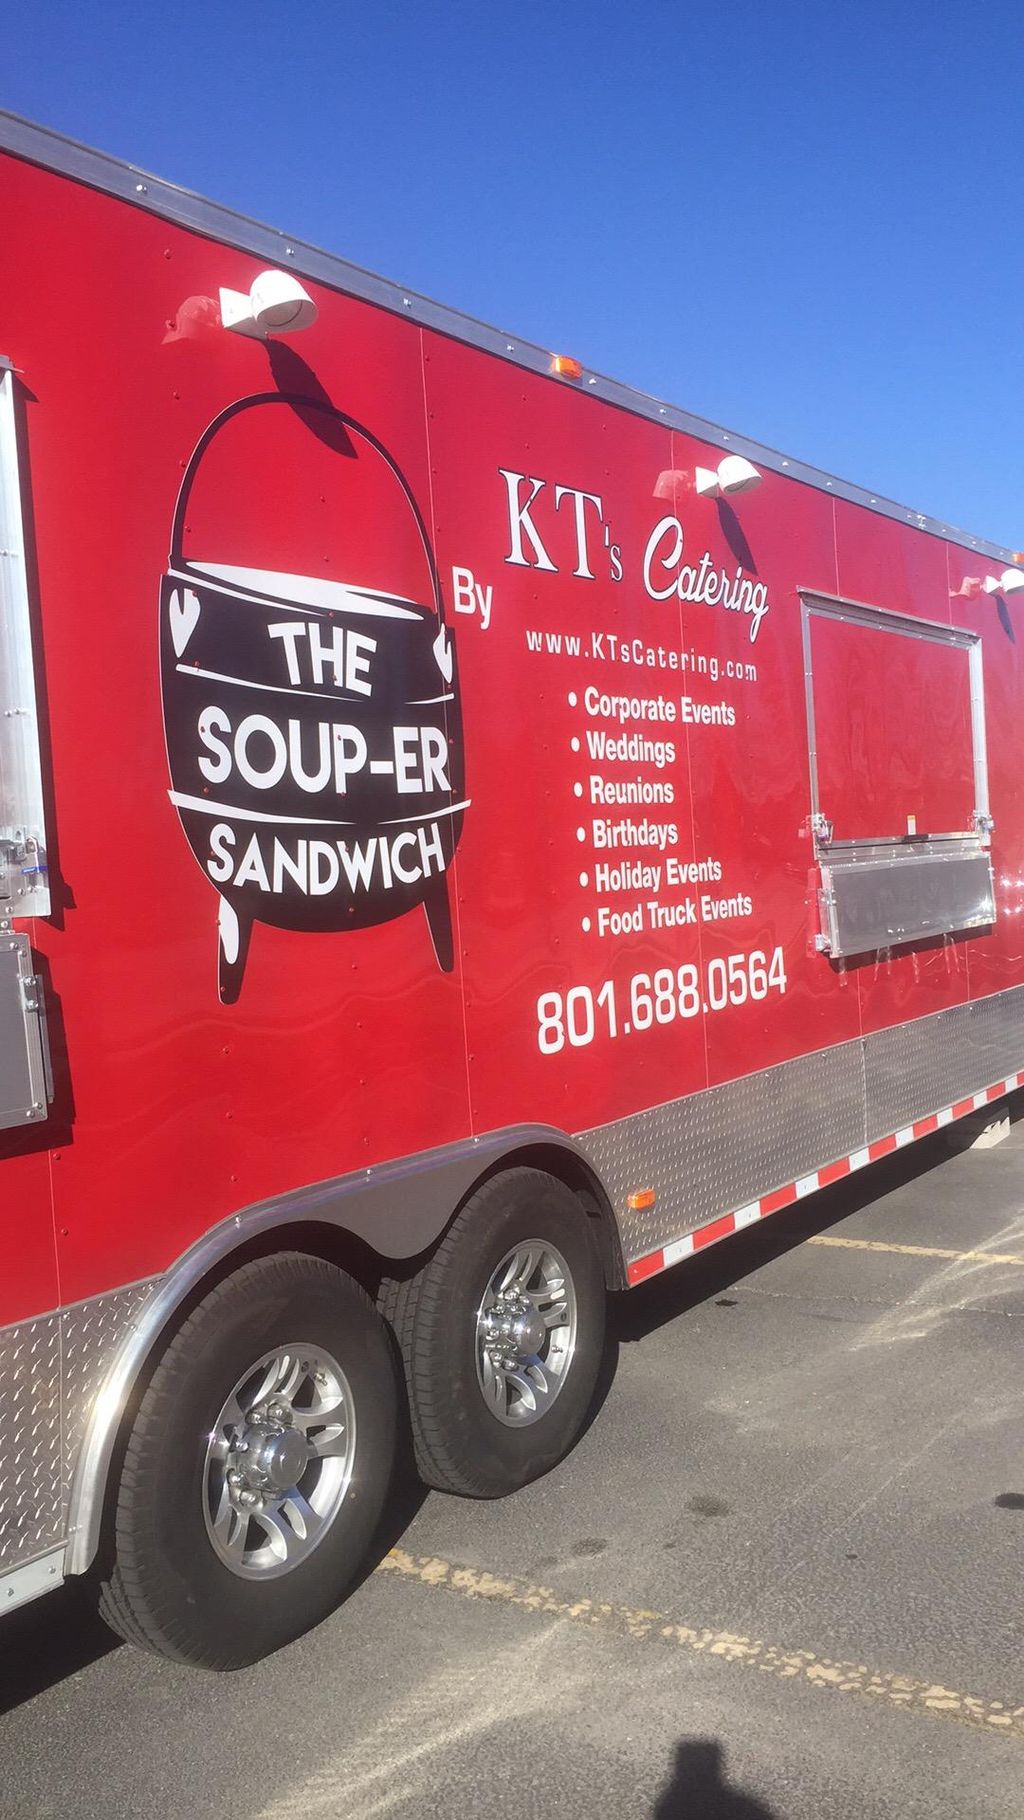 KT's Catering / The Soup-er Sandwich Food Truck